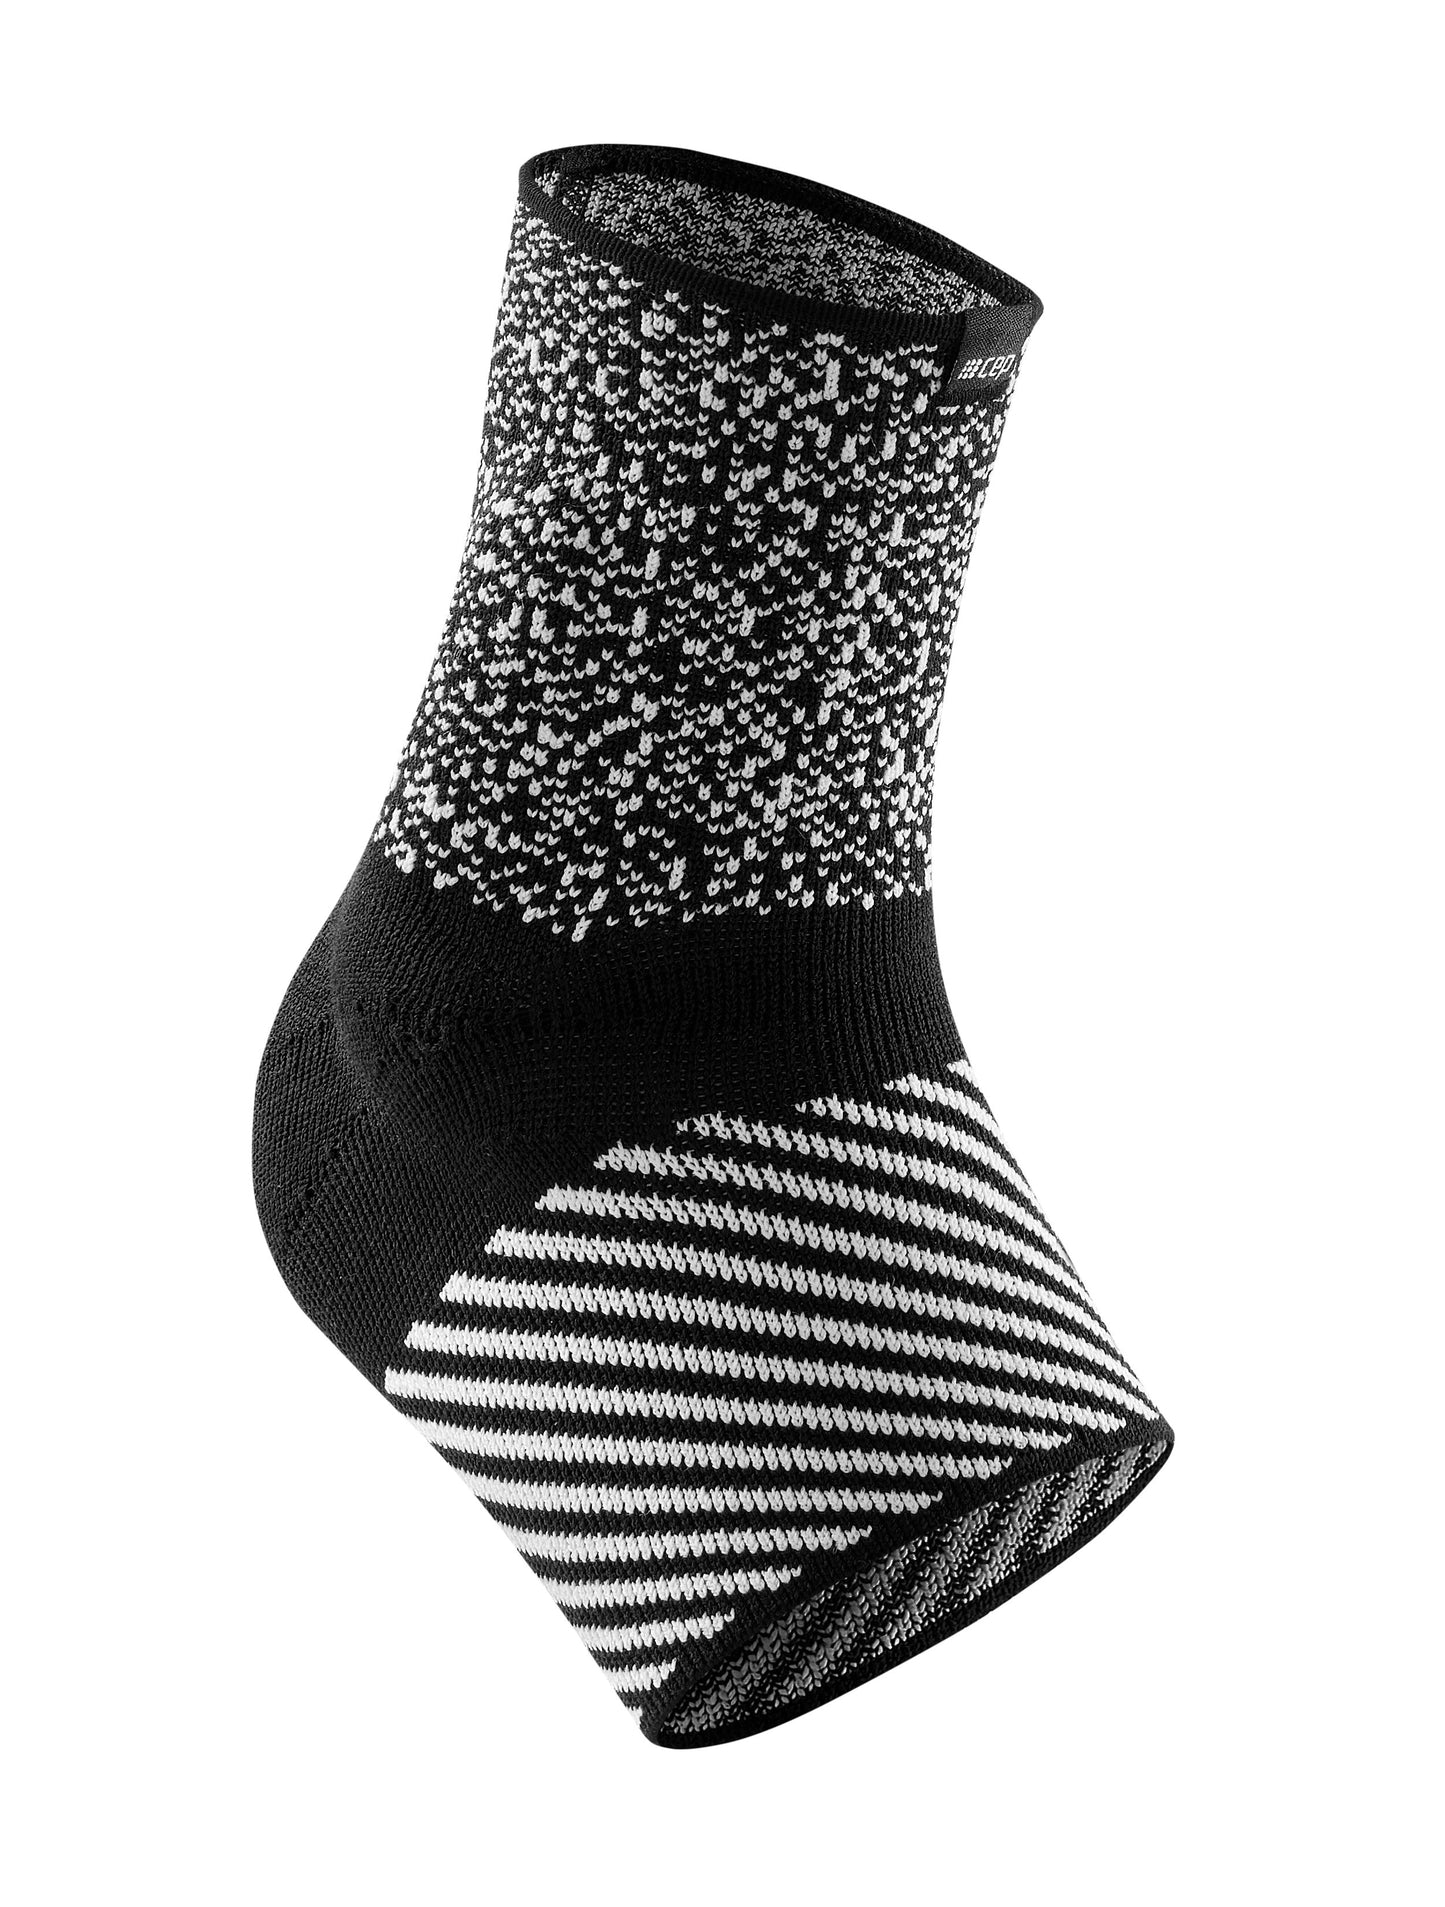 CEP Max Support Ankle Sleeve - Black/ White